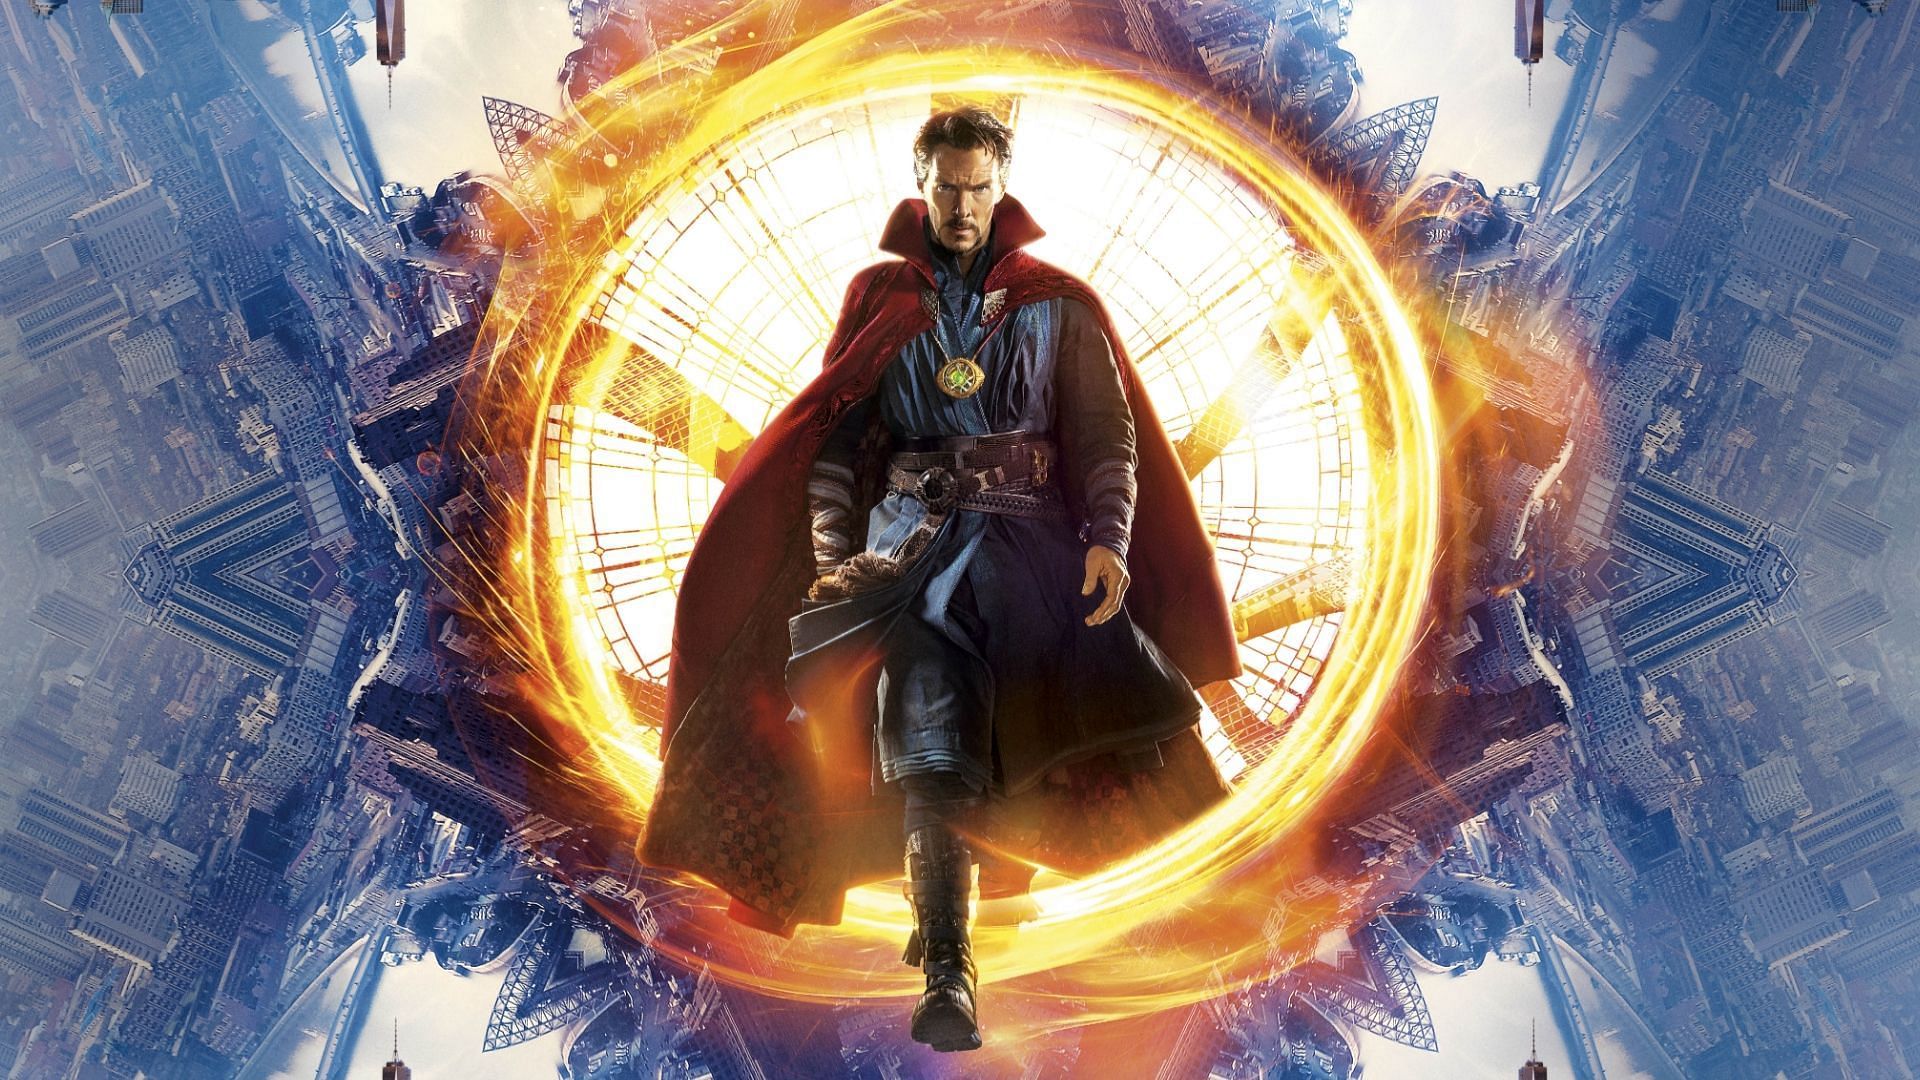 Doctor Strange has special teleportation abilities and can open portals to other dimensions. (Image Via Sportskeeda)